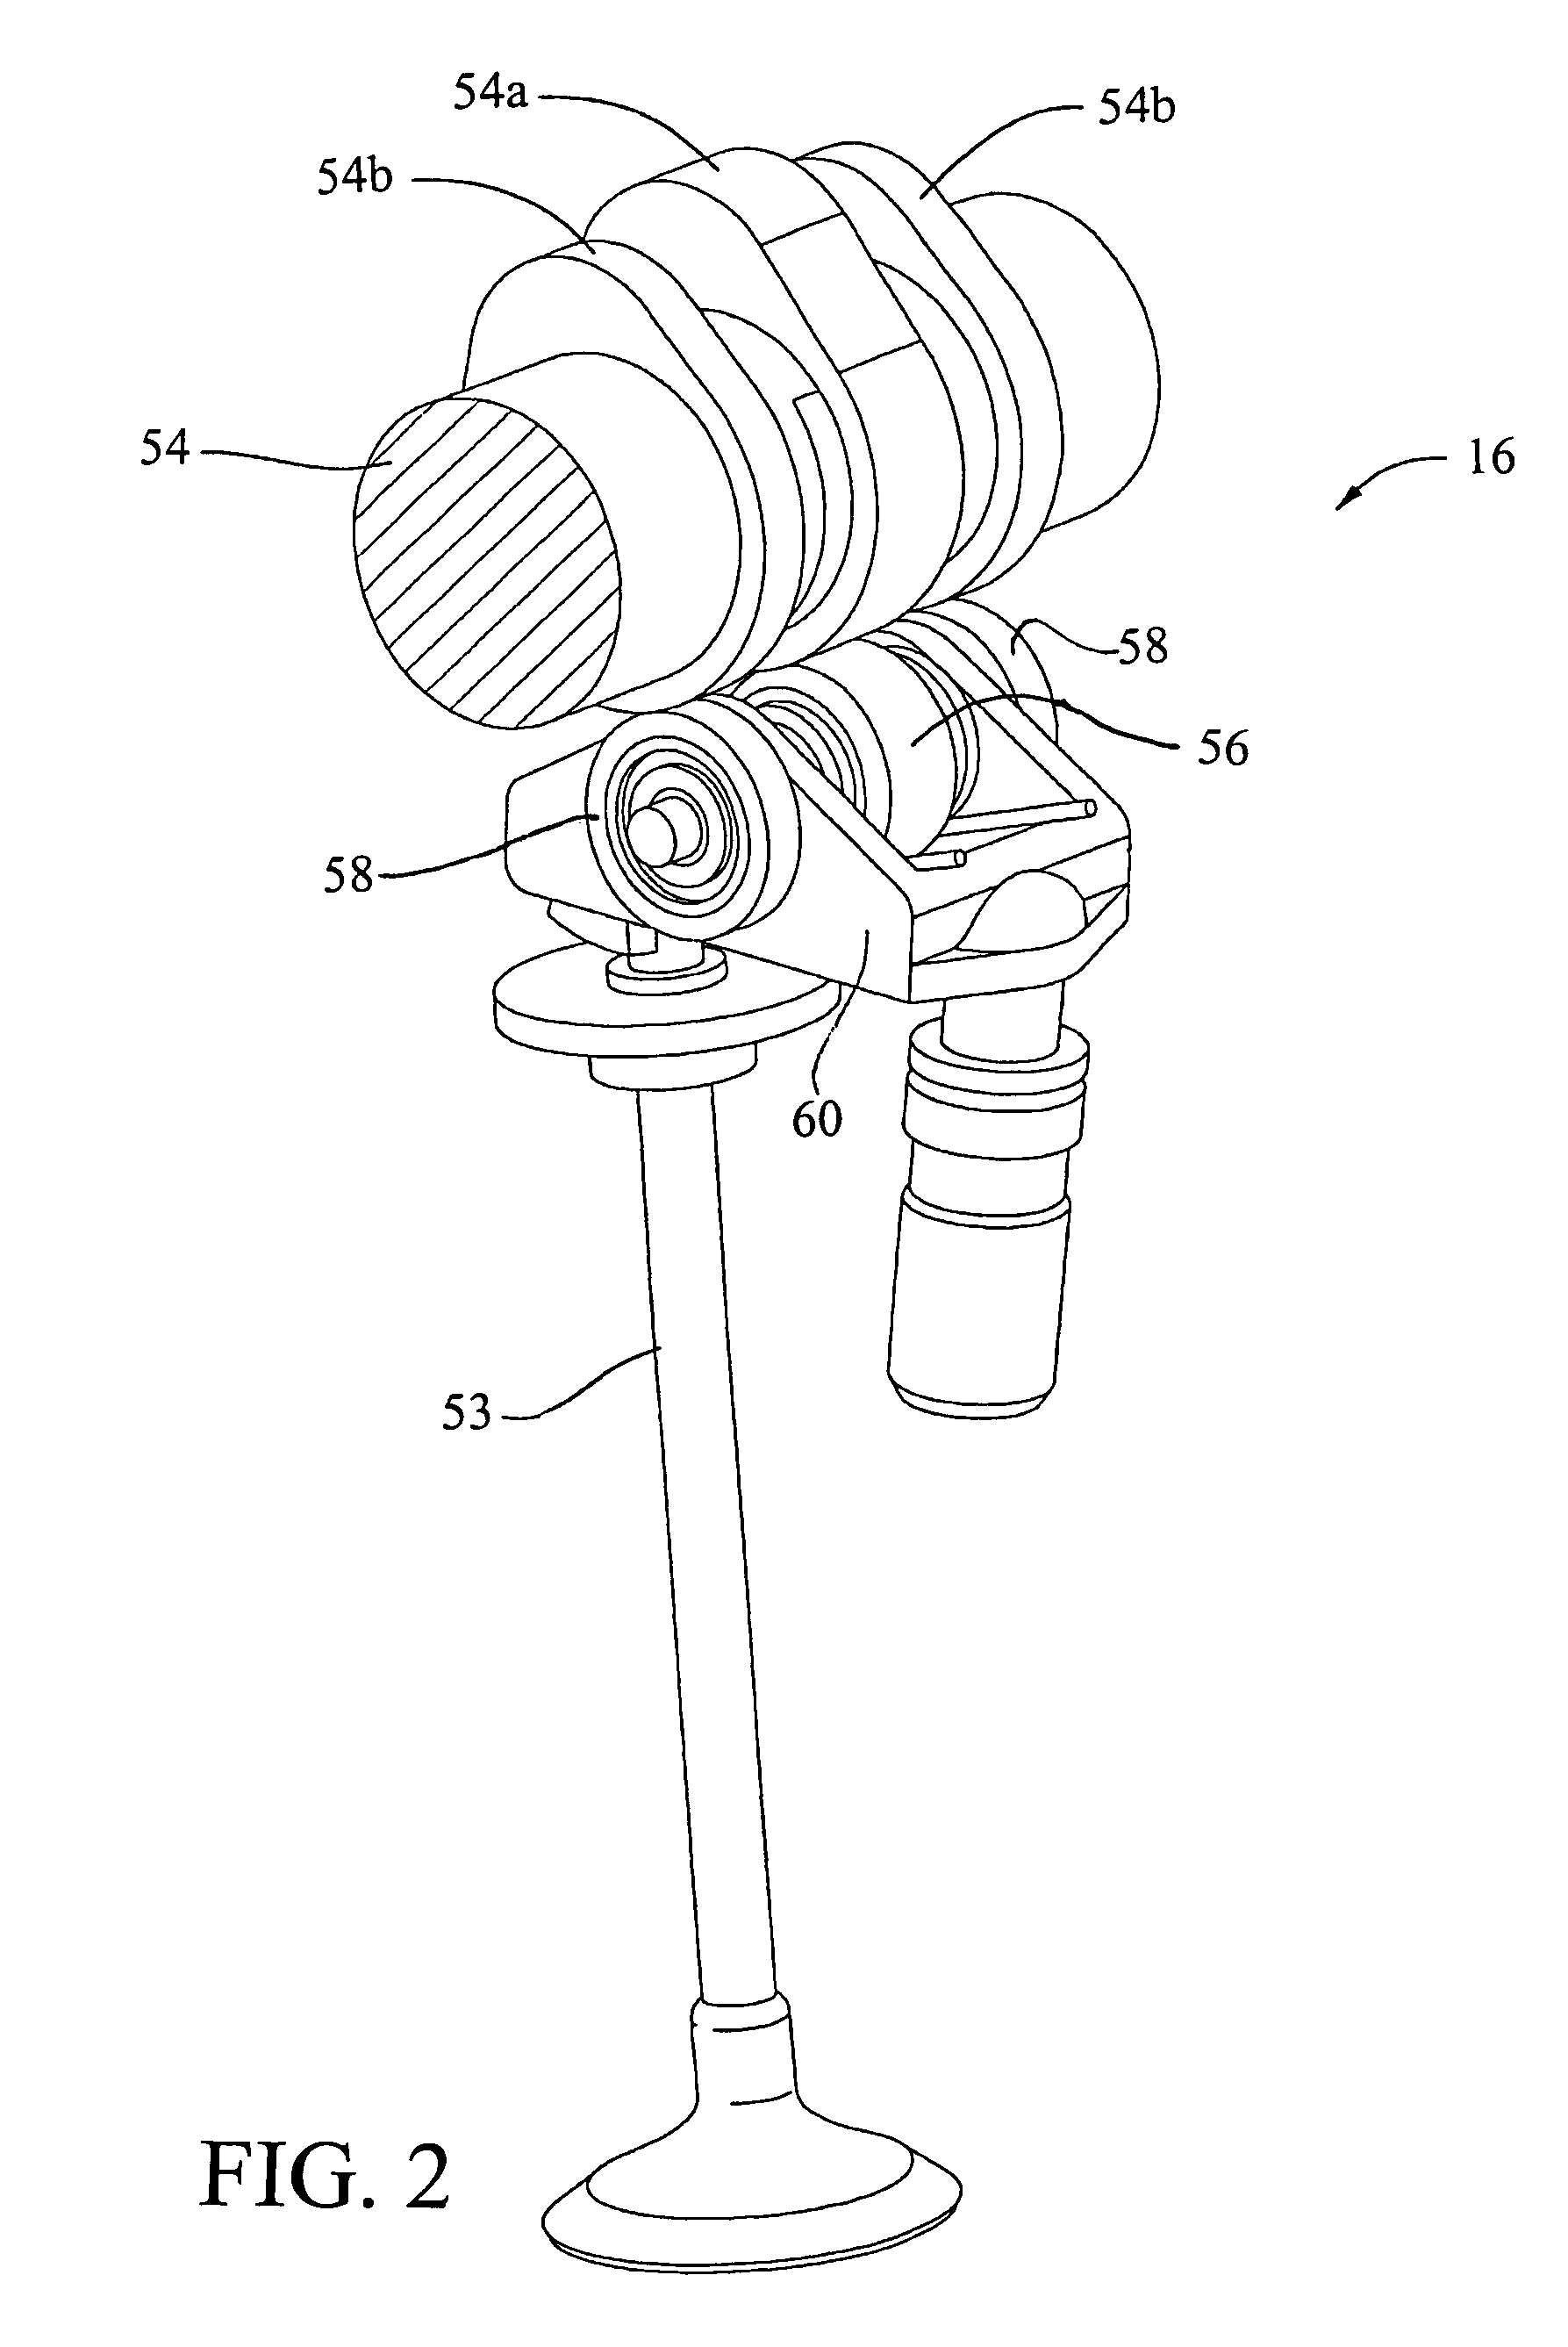 Method for effectively diagnosing the operational state of a variable valve lift device